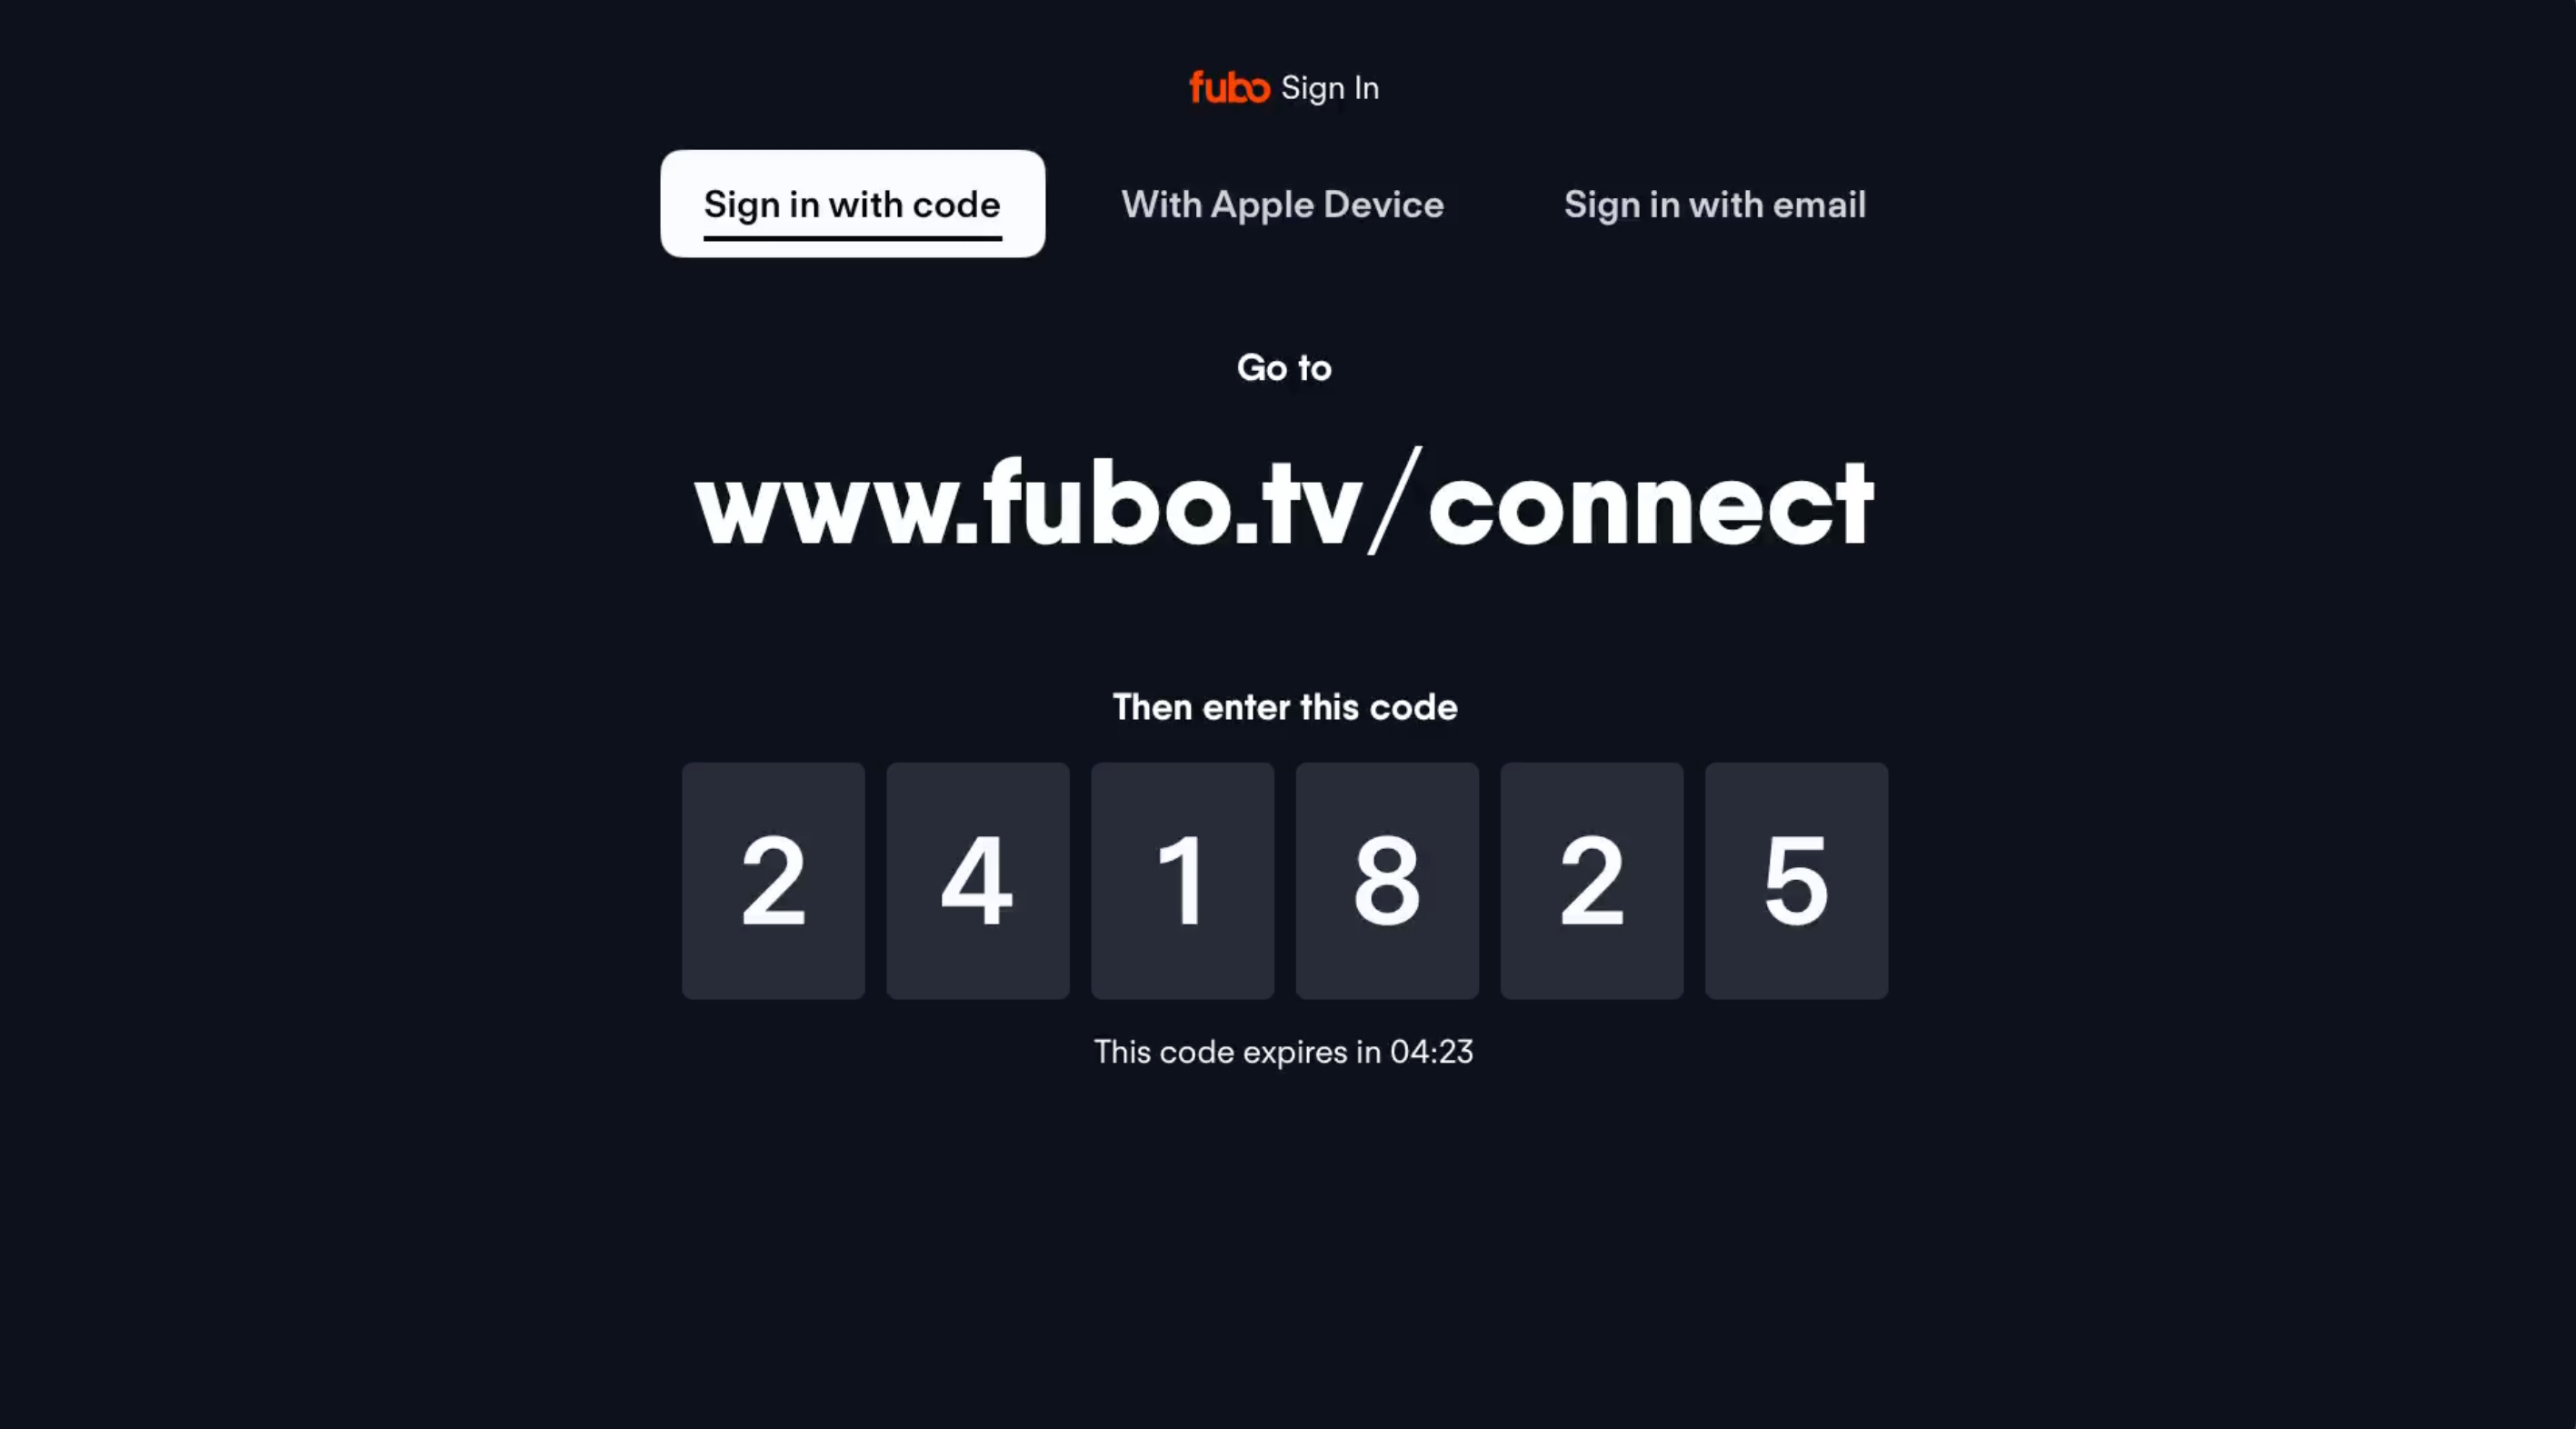 Sign in activation code; visit fubo.tv/connect and enter the code to sign in automatically